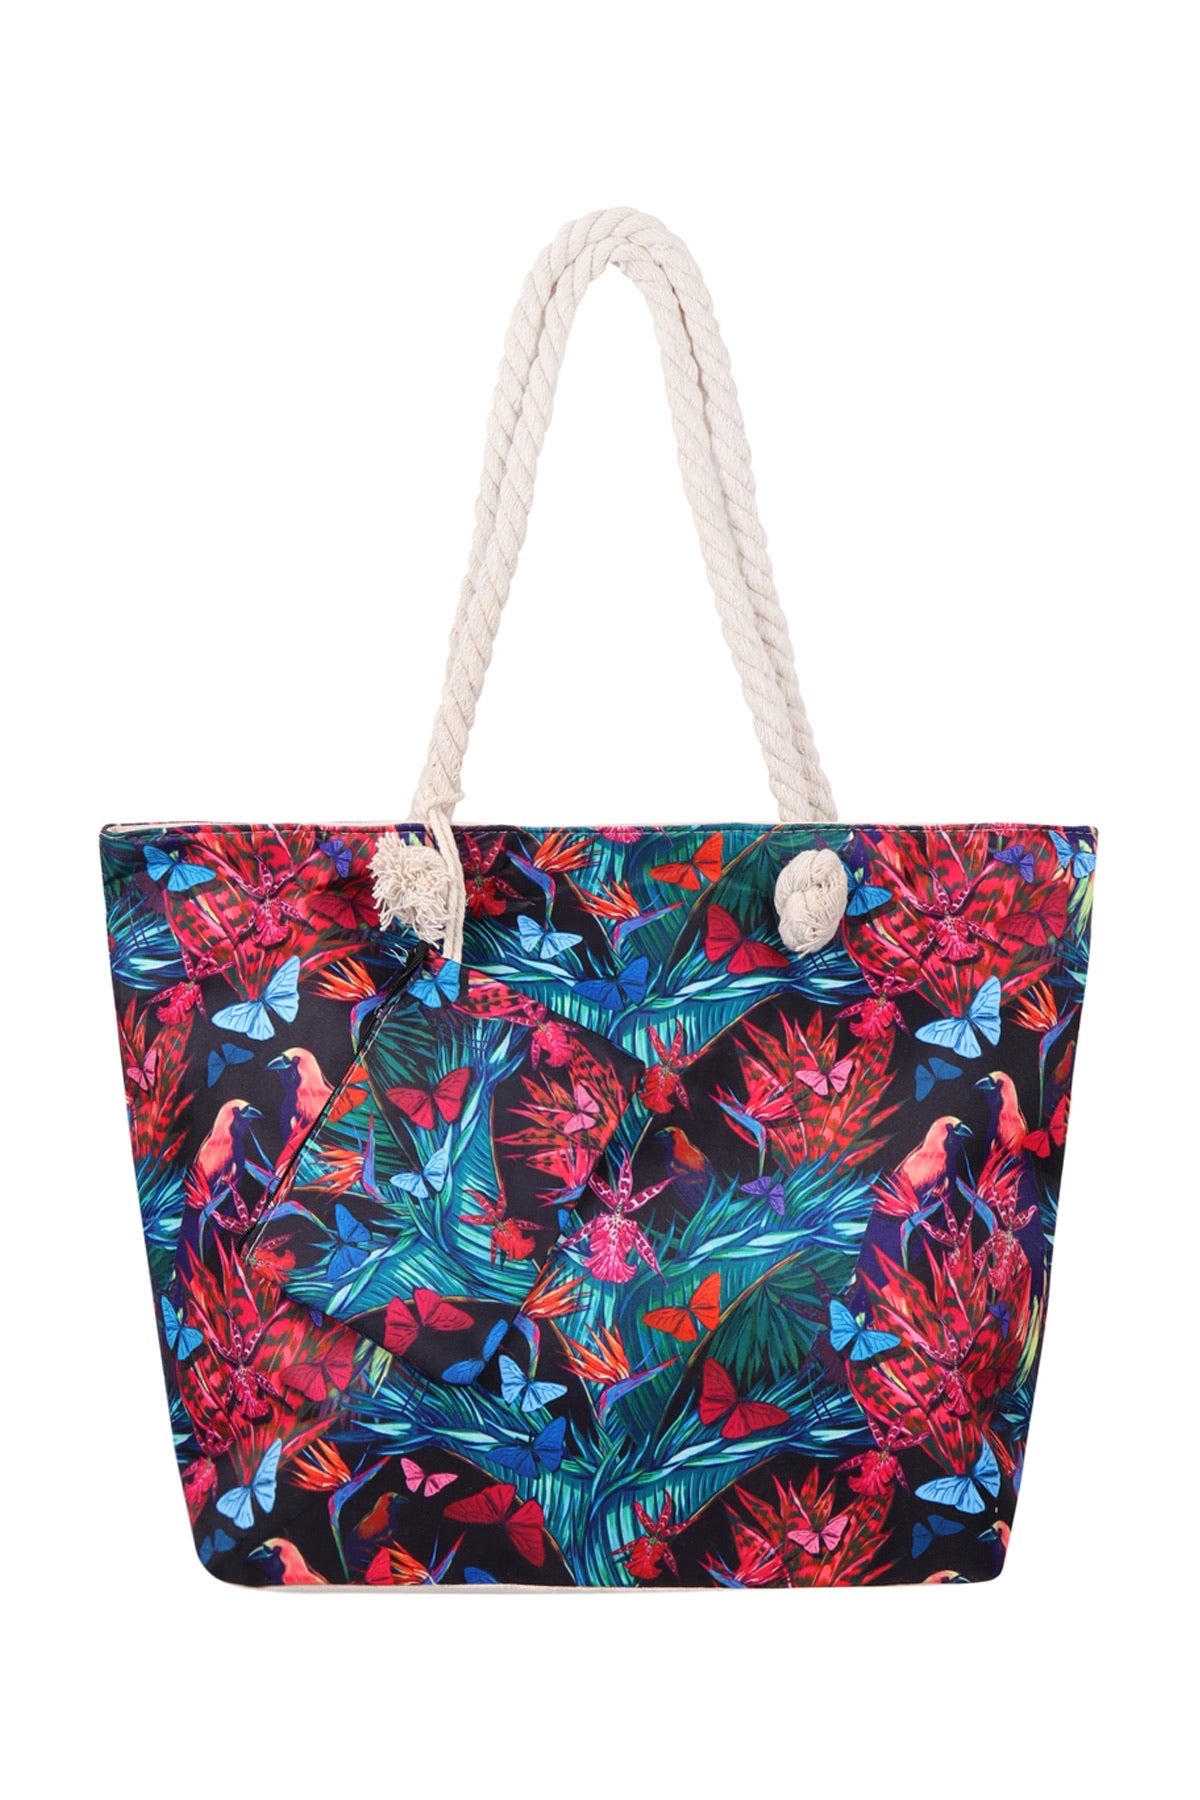 Floral tote w/matching wallet